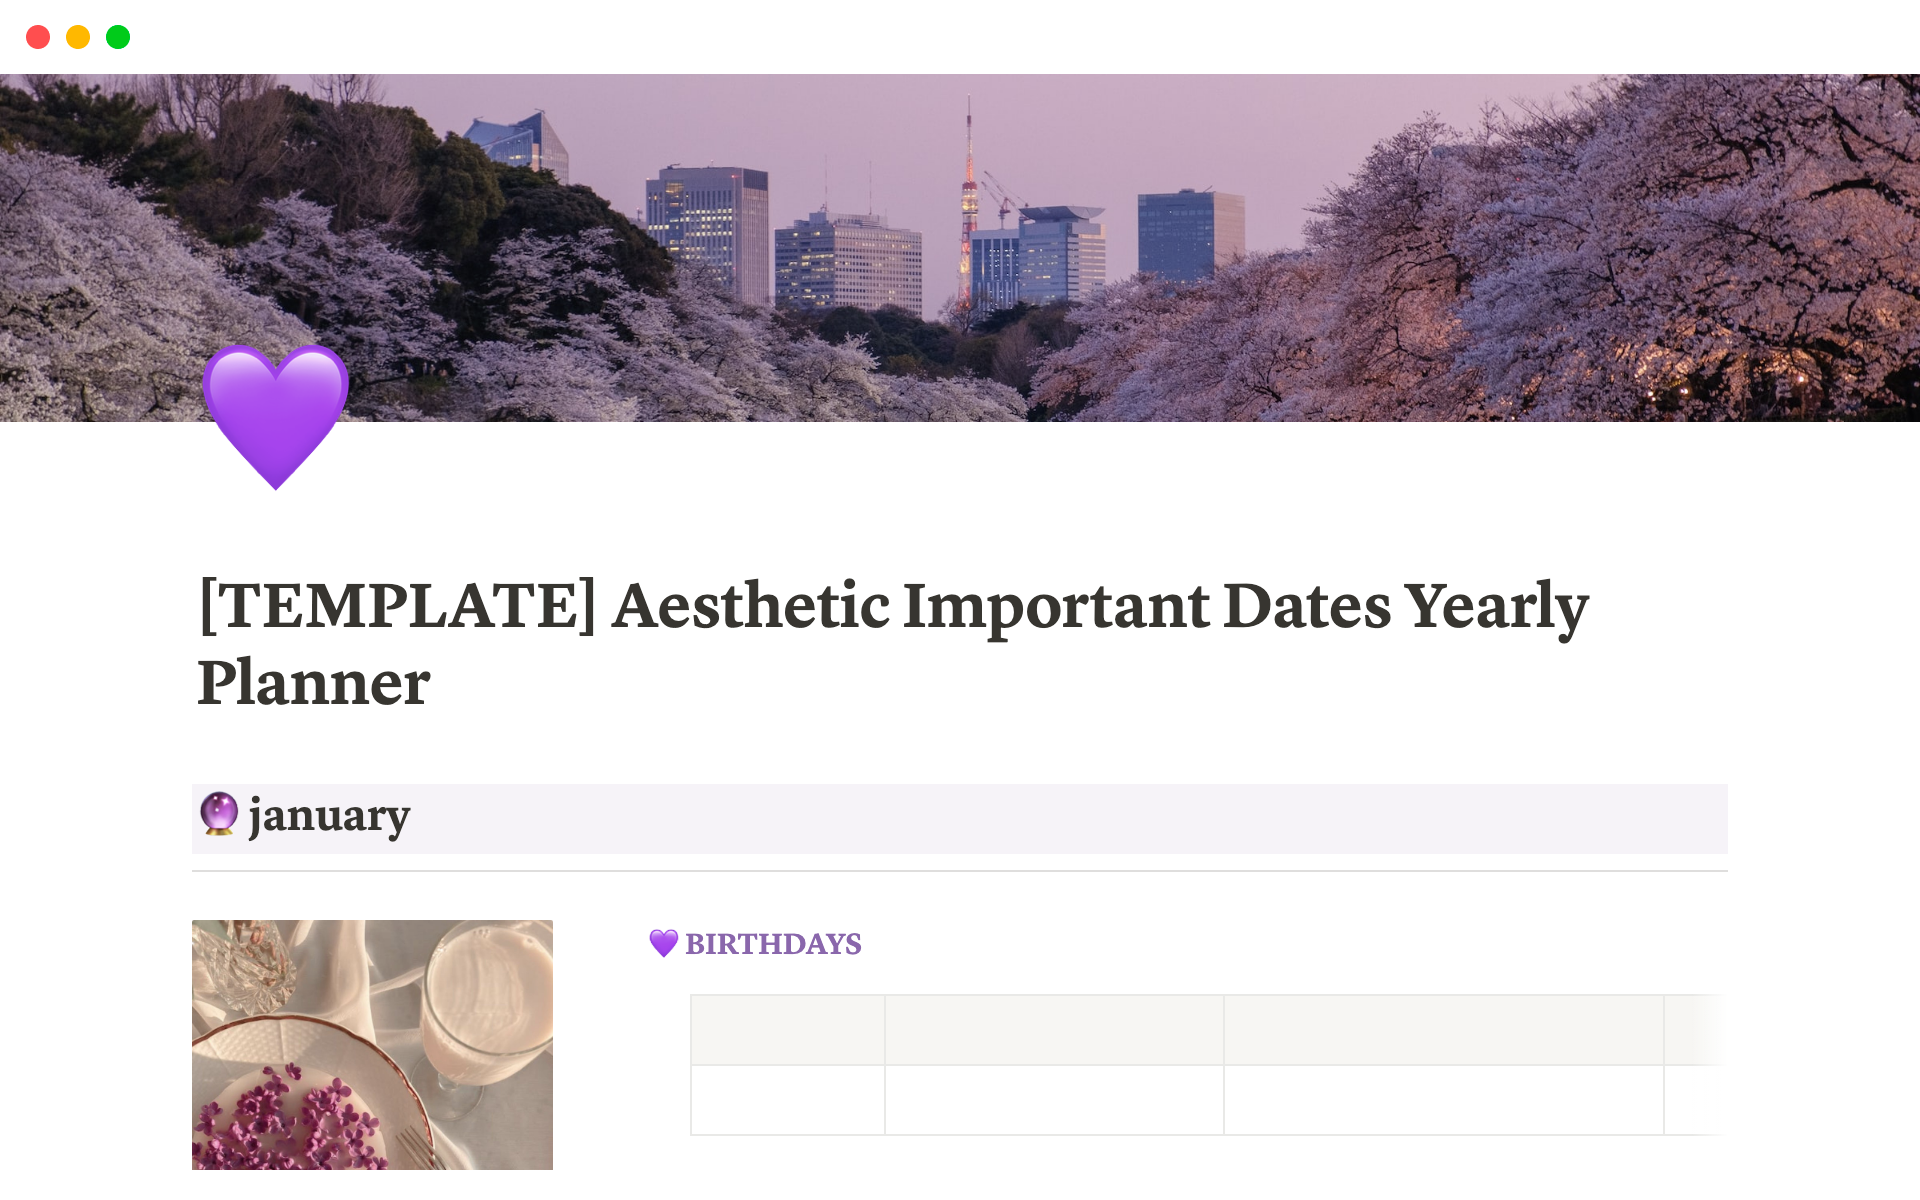 This Yearly Planner will help you track important dates, gift ideas, and related information in one place.